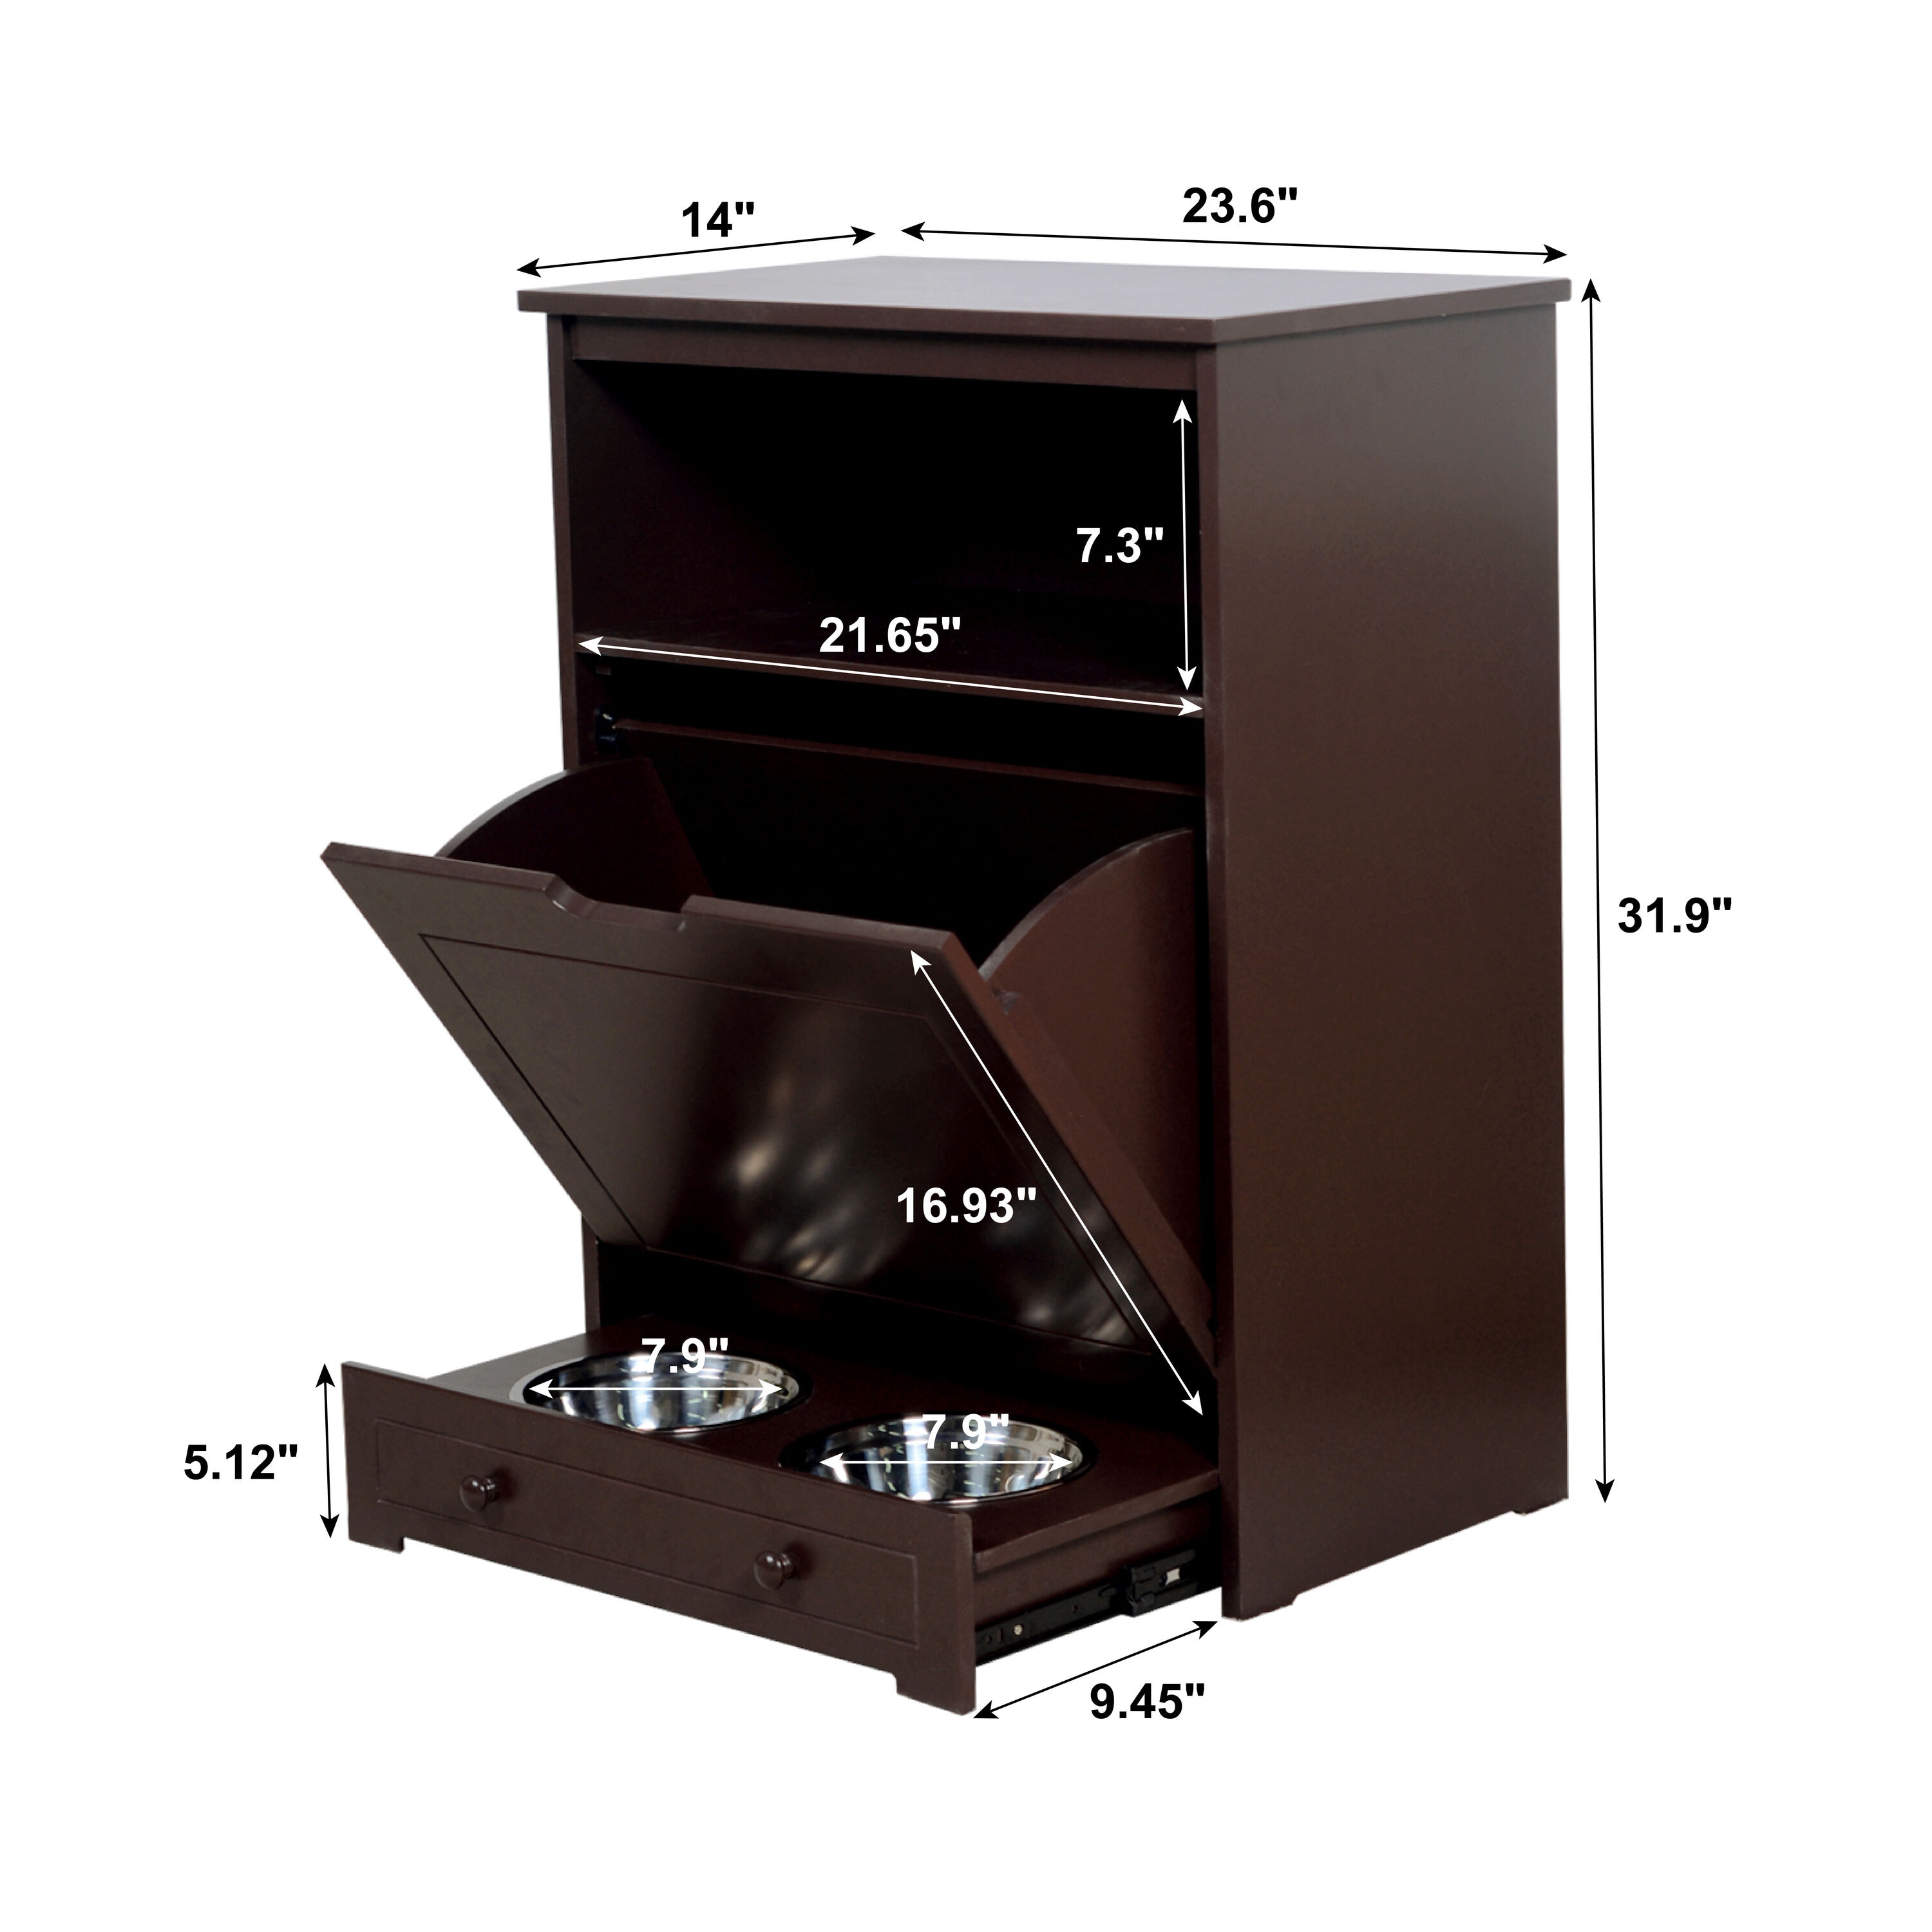 Foobrues Dog House Dog Food Storage Cabinet with Stainless Steel Double Pull Out Raised Dog Bowls for Small Dog, Black+Vintage